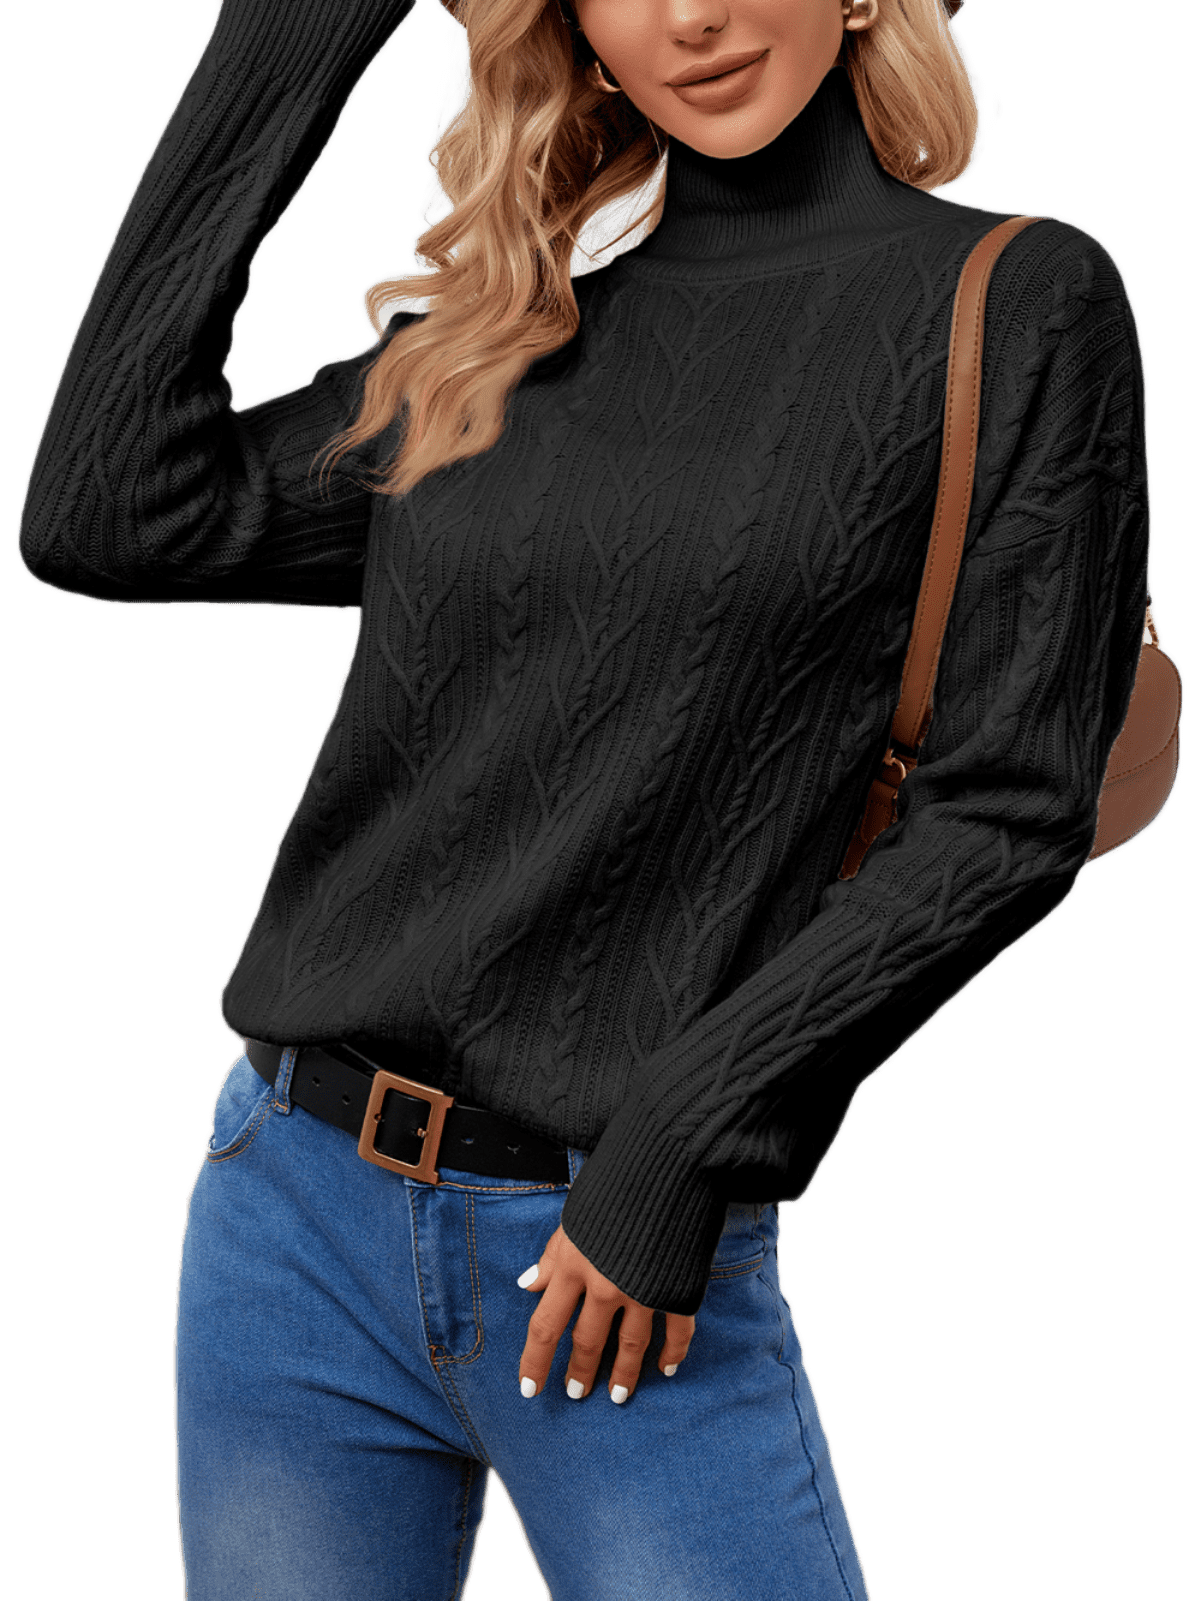 BERTHMEER Black Turtleneck Sweaters for Women Oversized Sweaters Cable ...